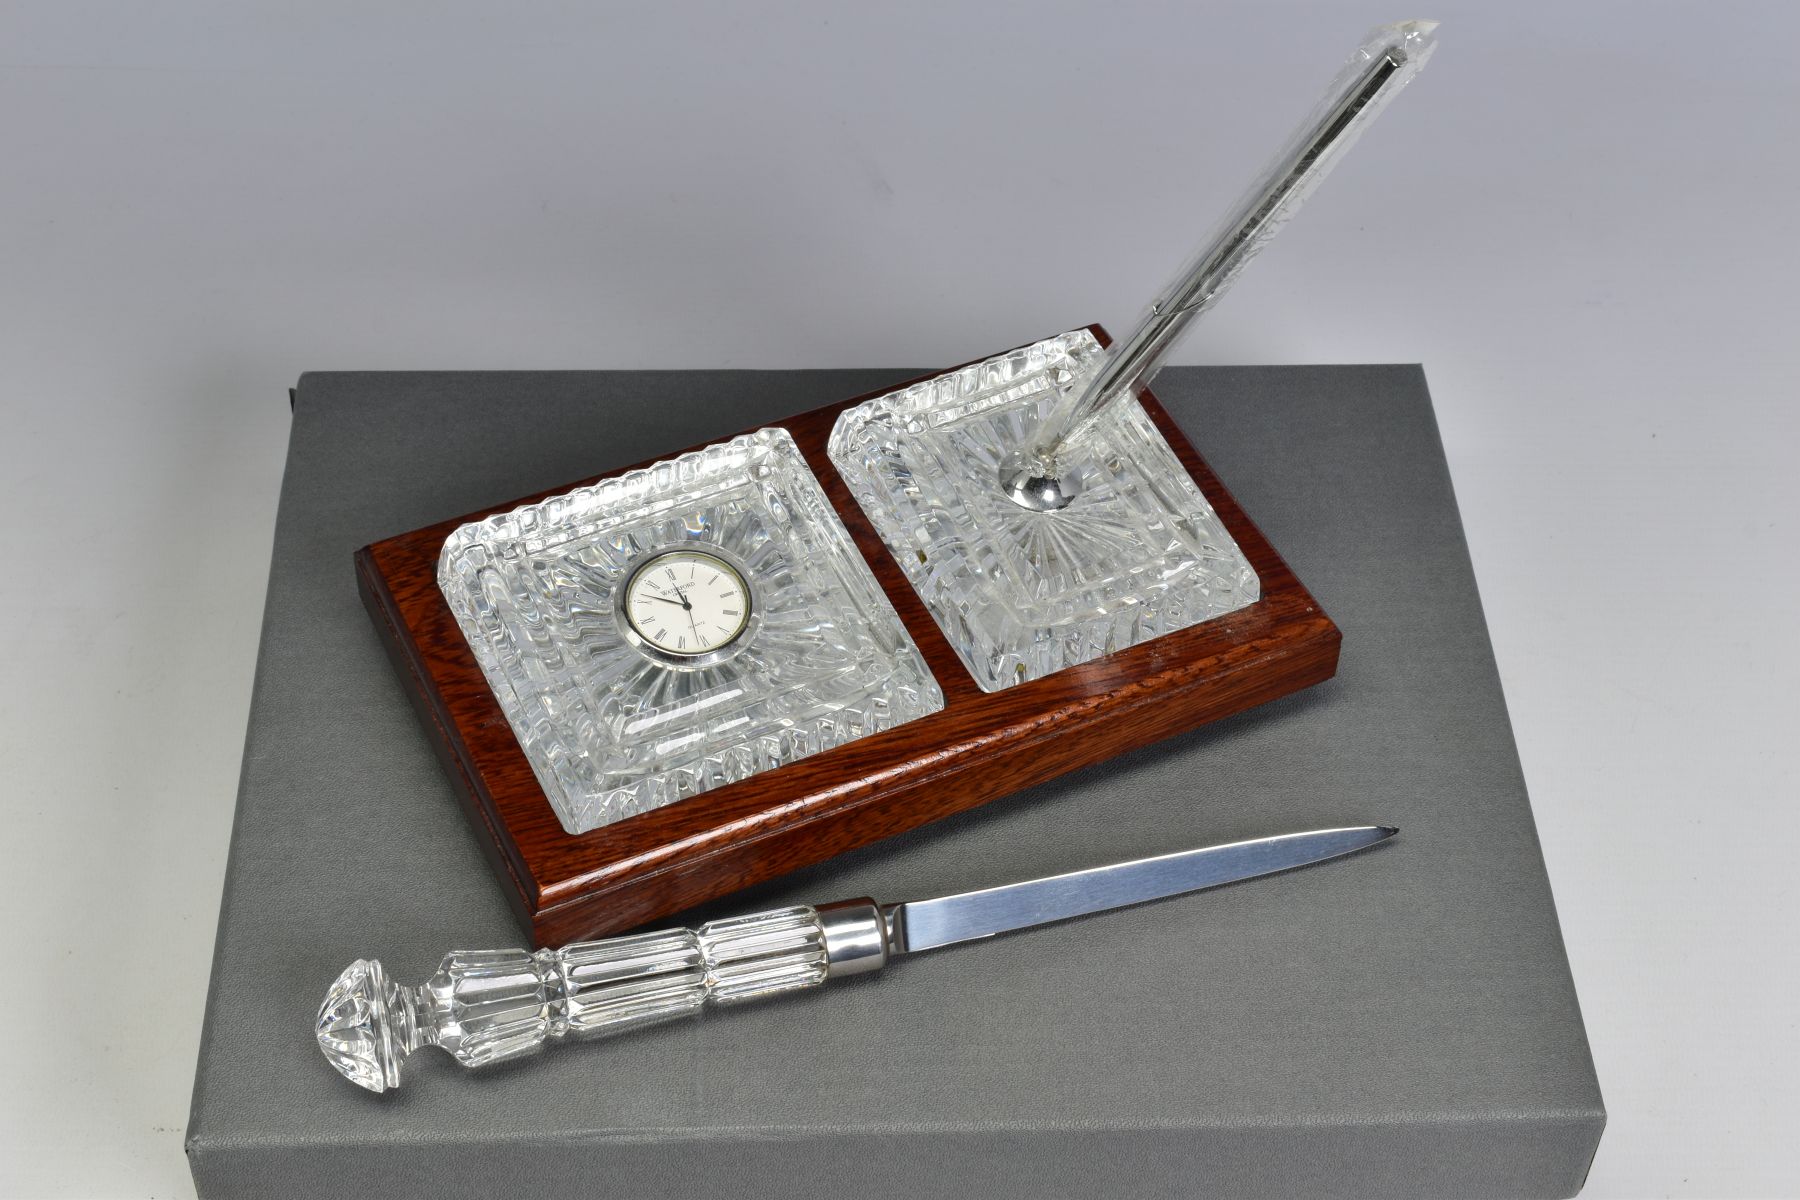 A BOXED WATERFORD CRYSTAL DESK SET, comprising a quartz clock and a pen stand with pen set in a